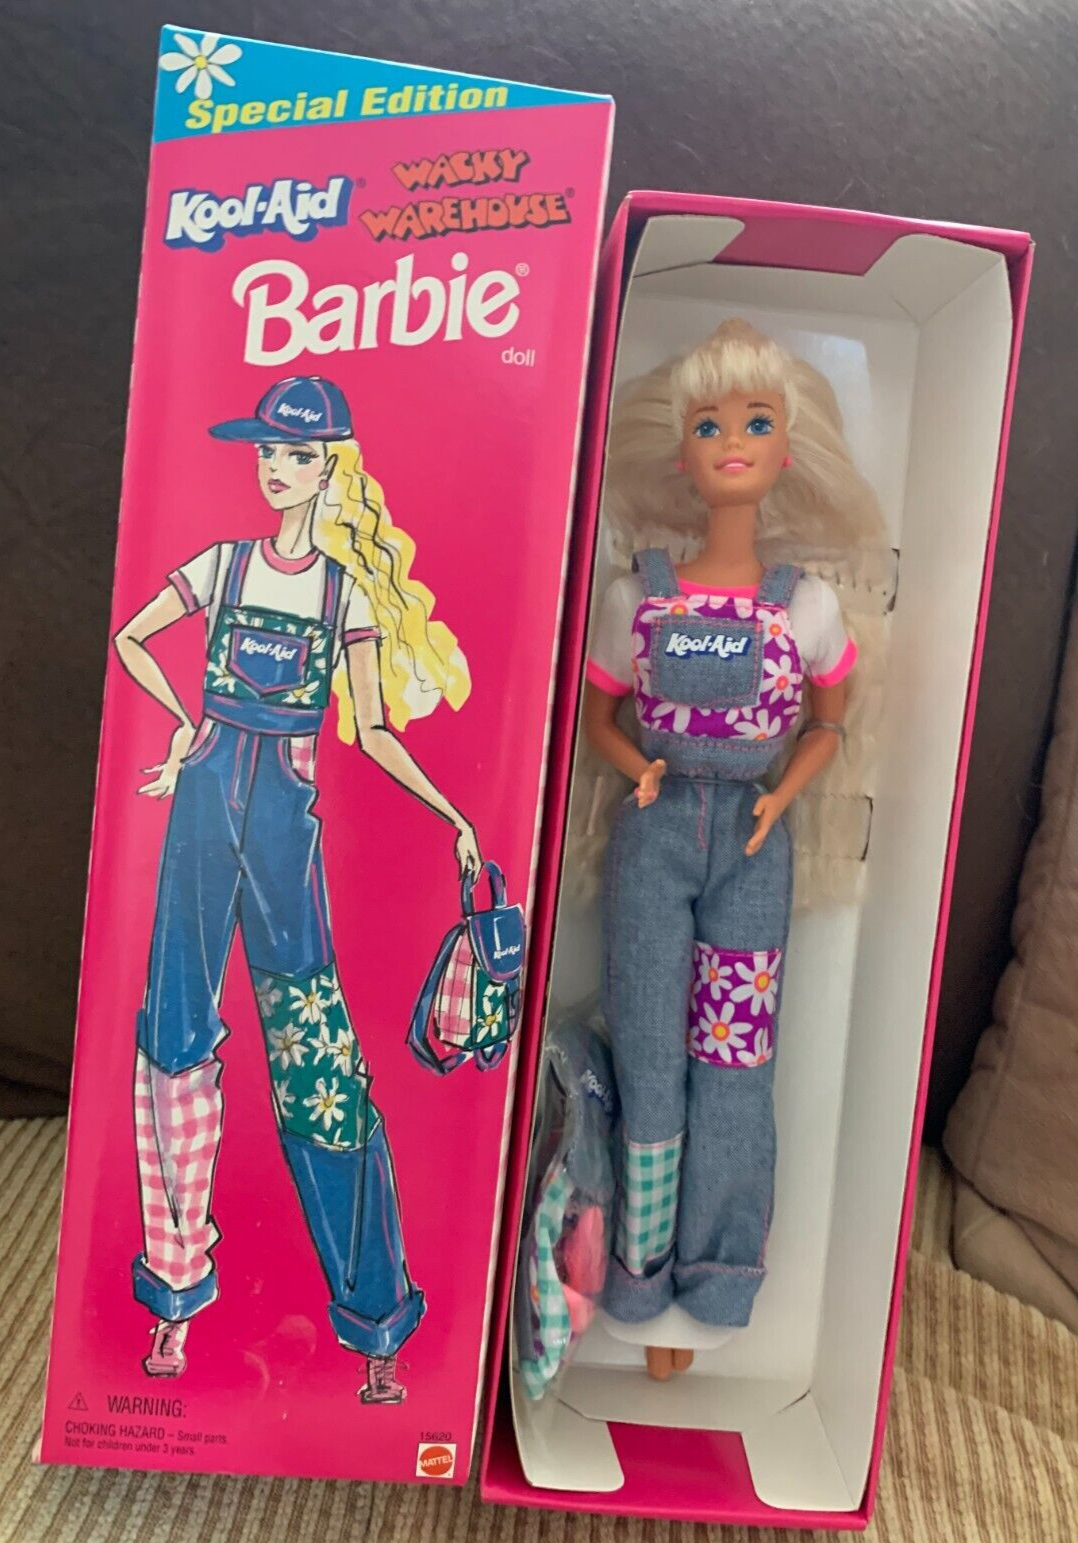 barbie wearing overalls in the box